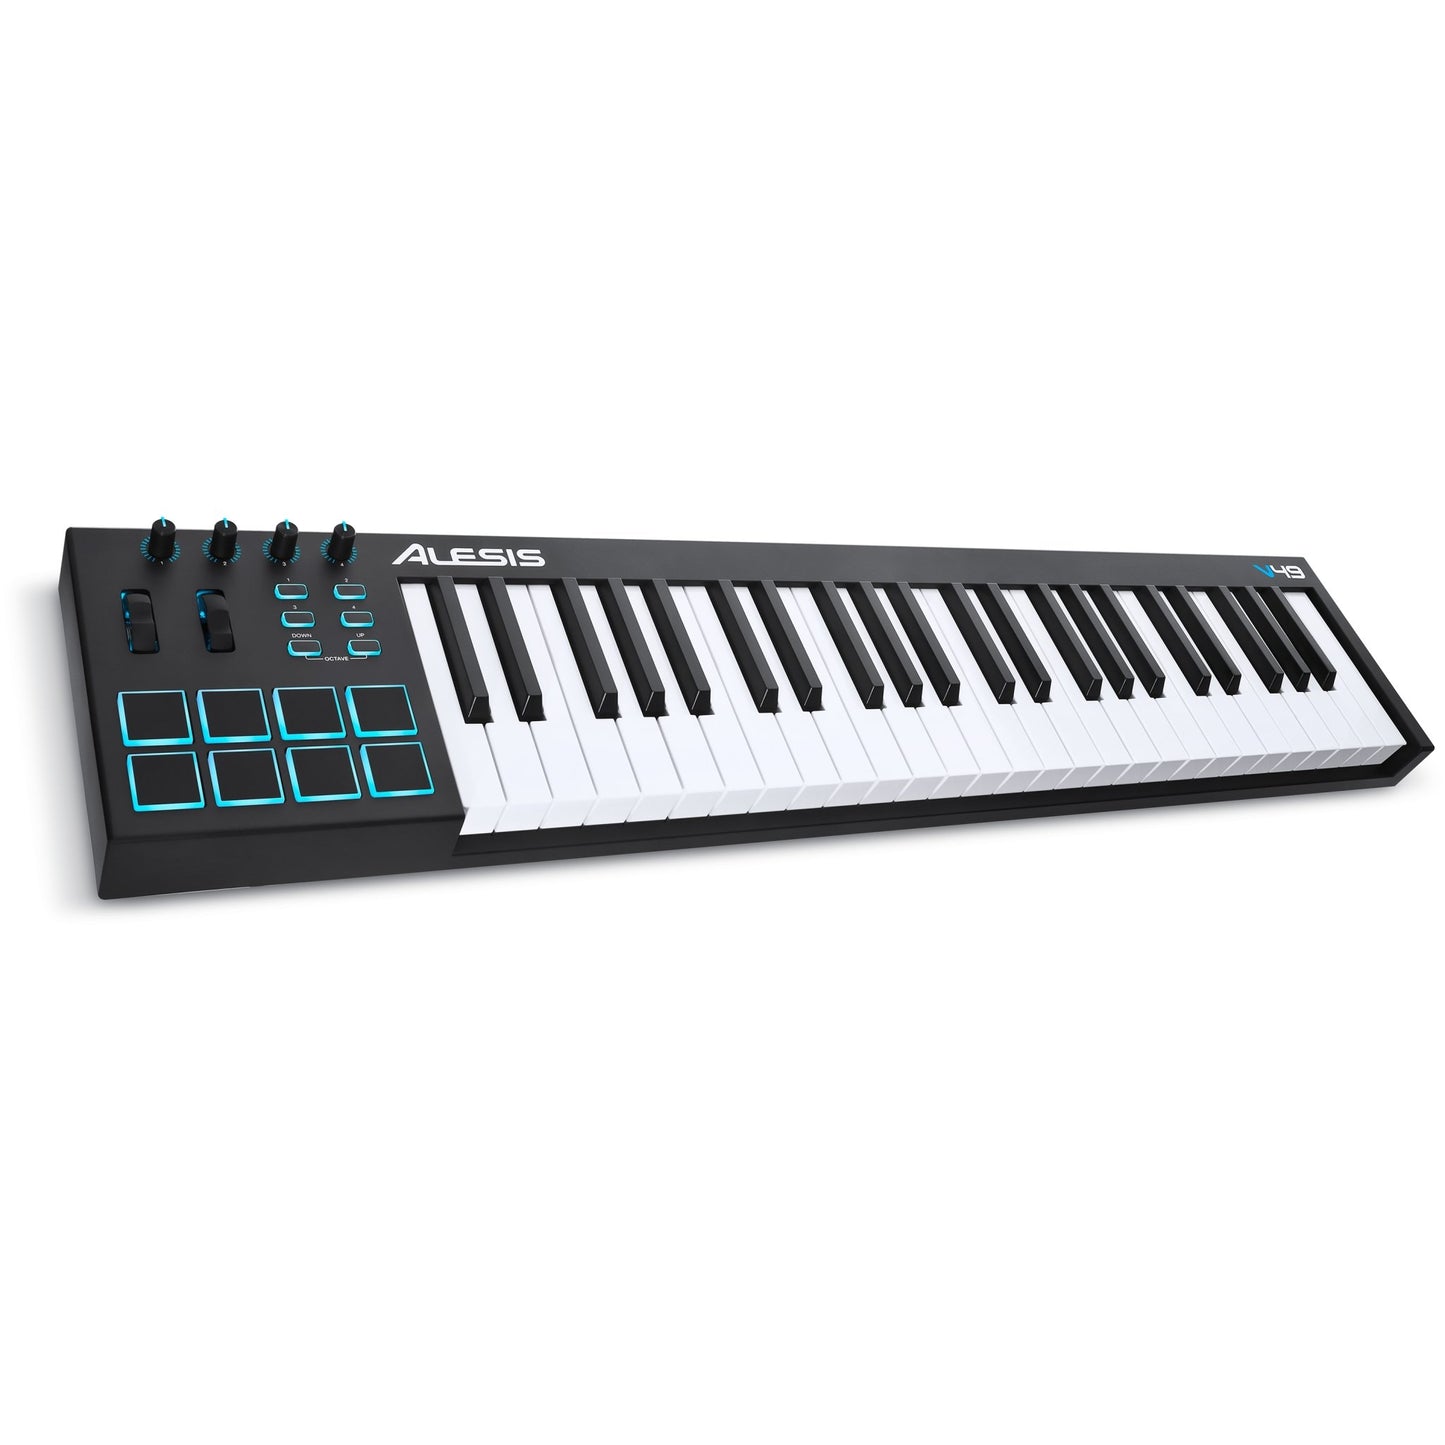 This is the top side view of an Alesis V49 49-key Keyboard Controller.